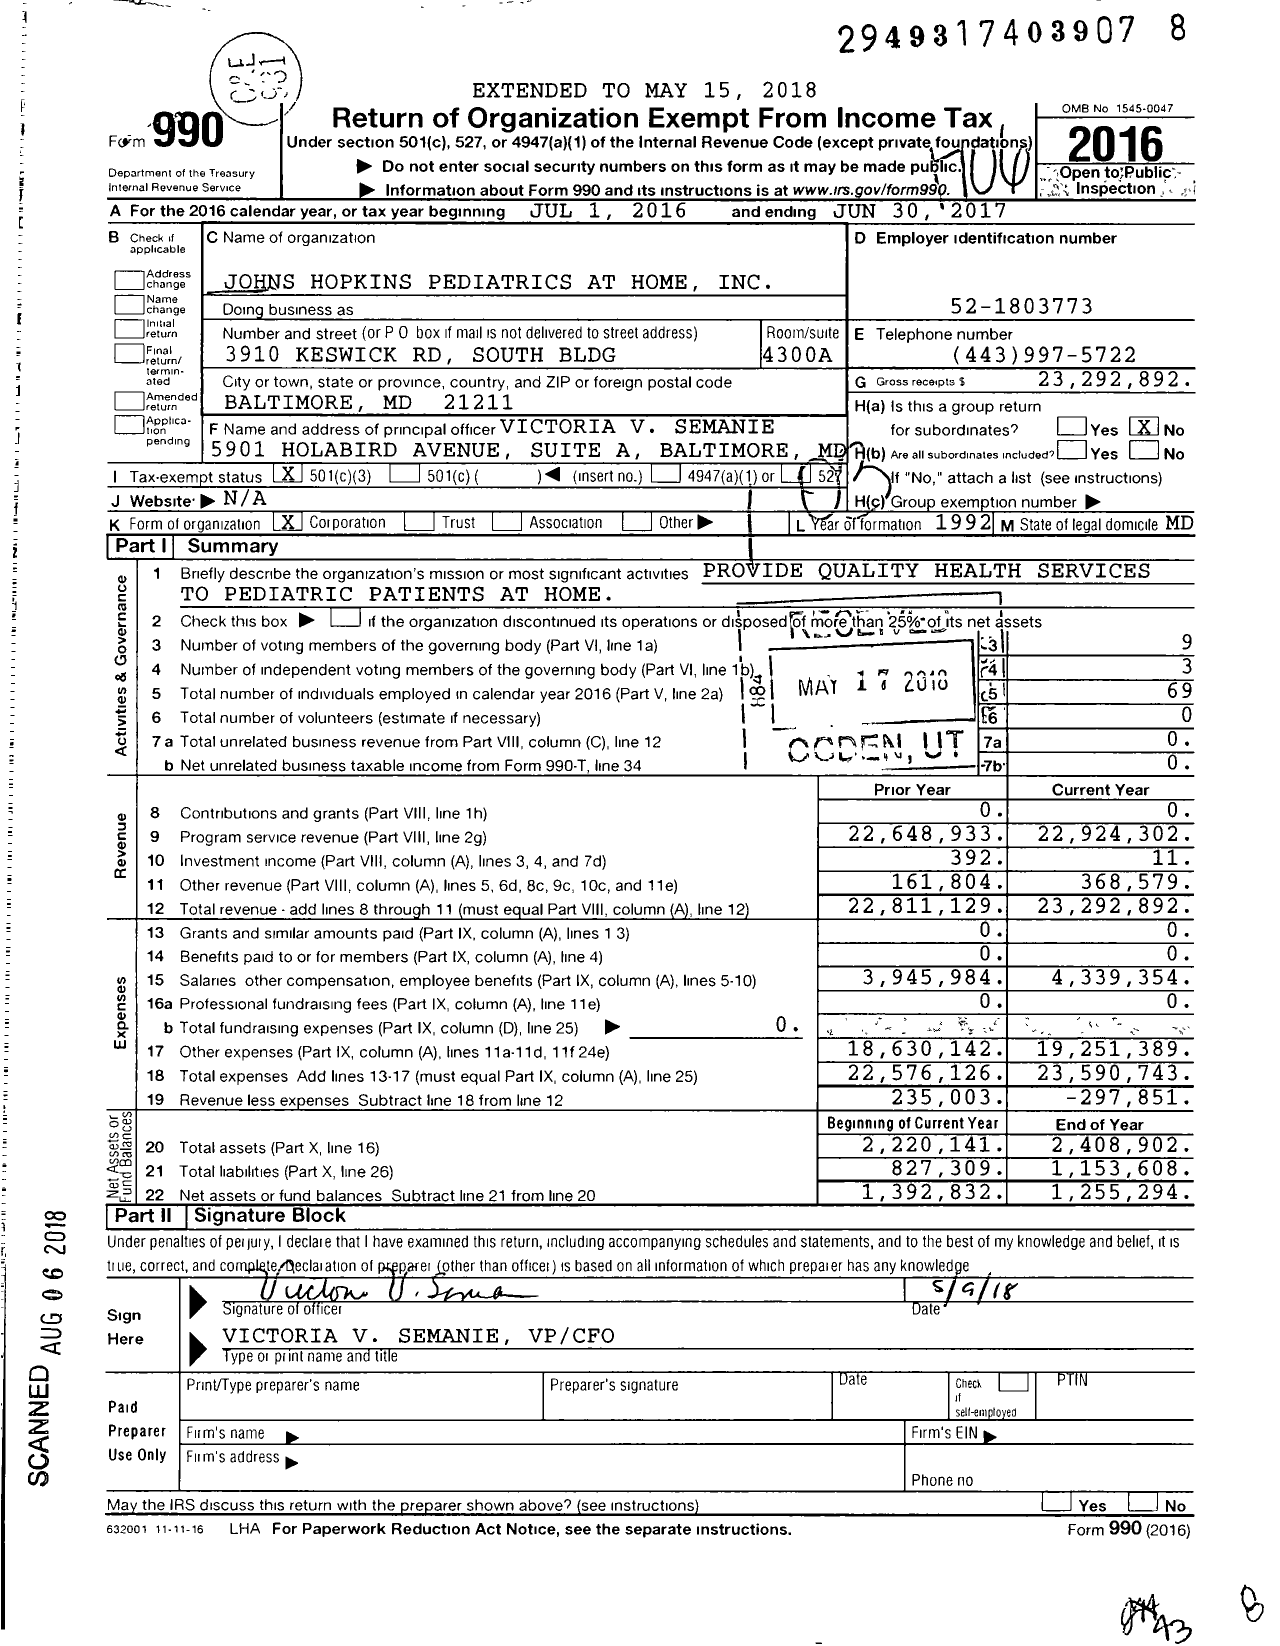 Image of first page of 2016 Form 990 for Johns Hopkins Pediatrics at Home